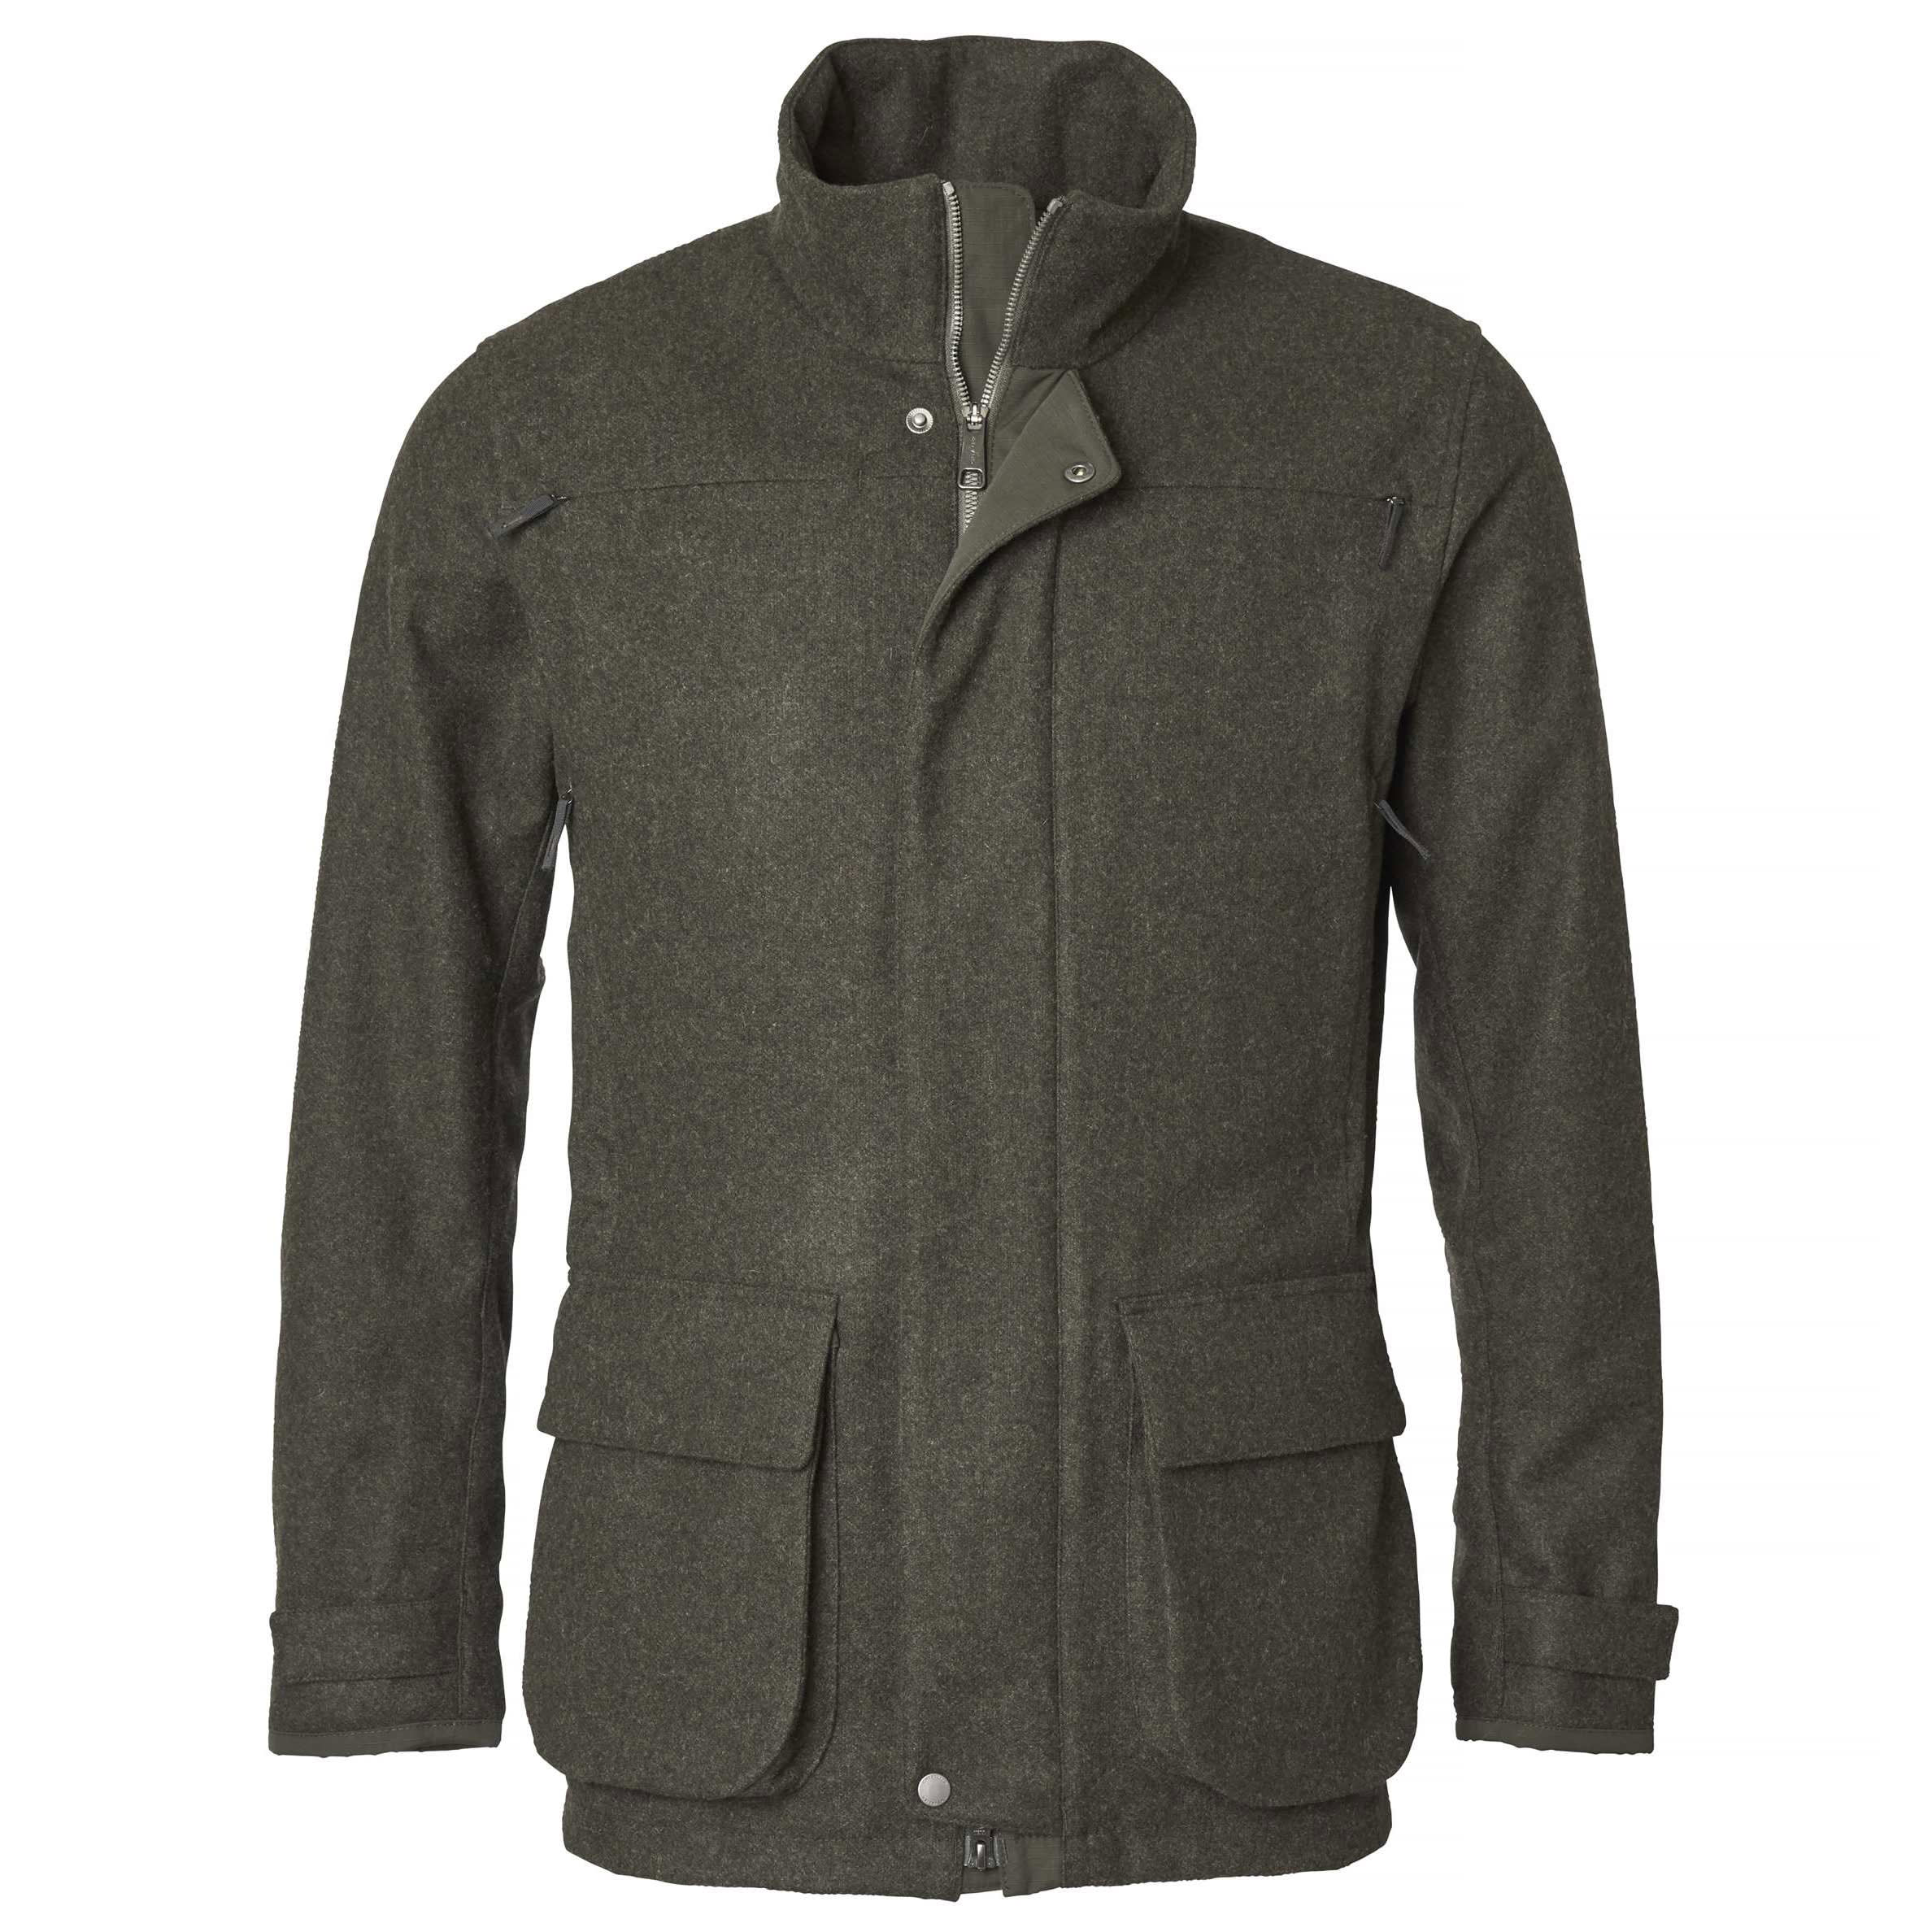 Buy Chevalier Men's Loden Jacket 2.0 from Outnorth